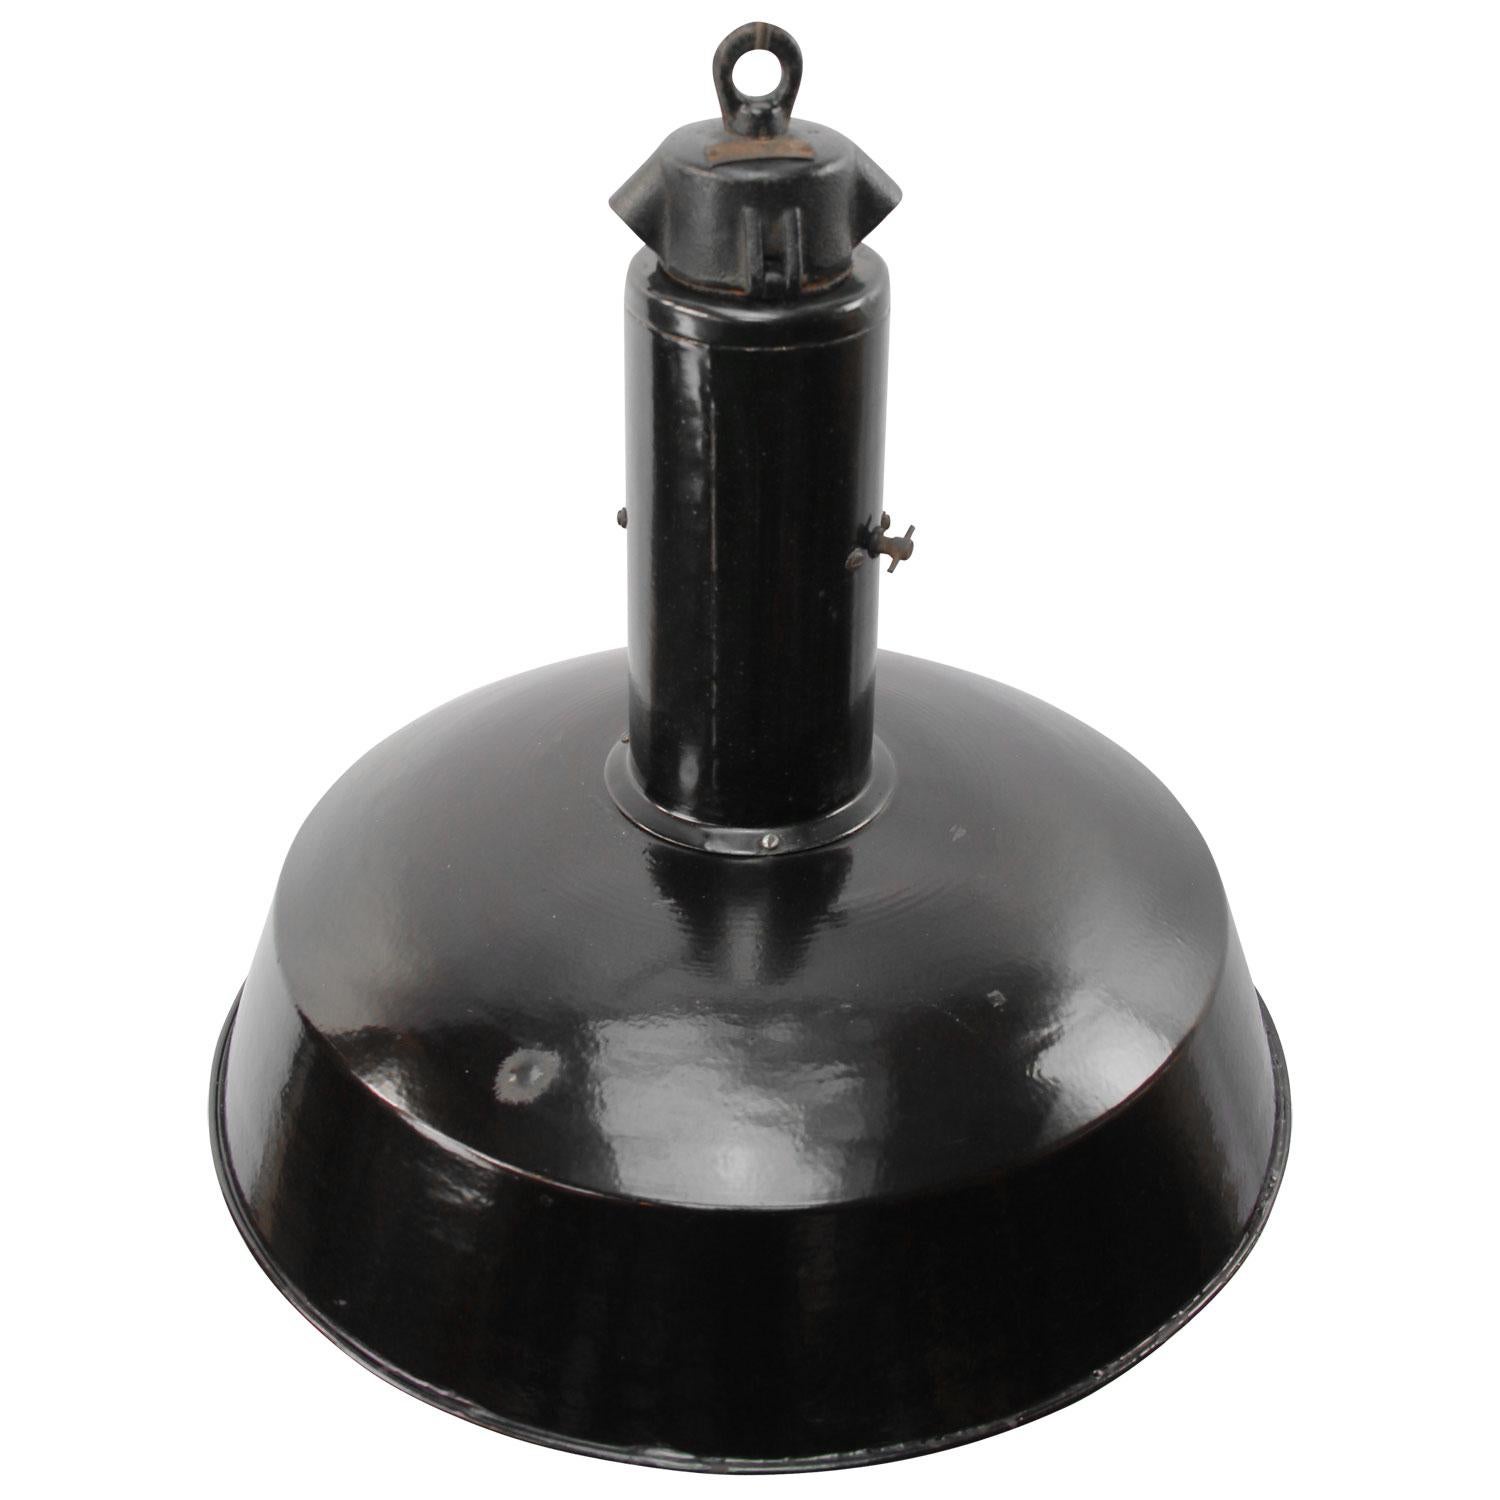 Black enamel industrial hanging lamp
white interior
cast iron top

Weight 4.10 kg / 9 lb

Priced per individual item. All lamps have been made suitable by international standards for incandescent light bulbs, energy-efficient and LED bulbs.